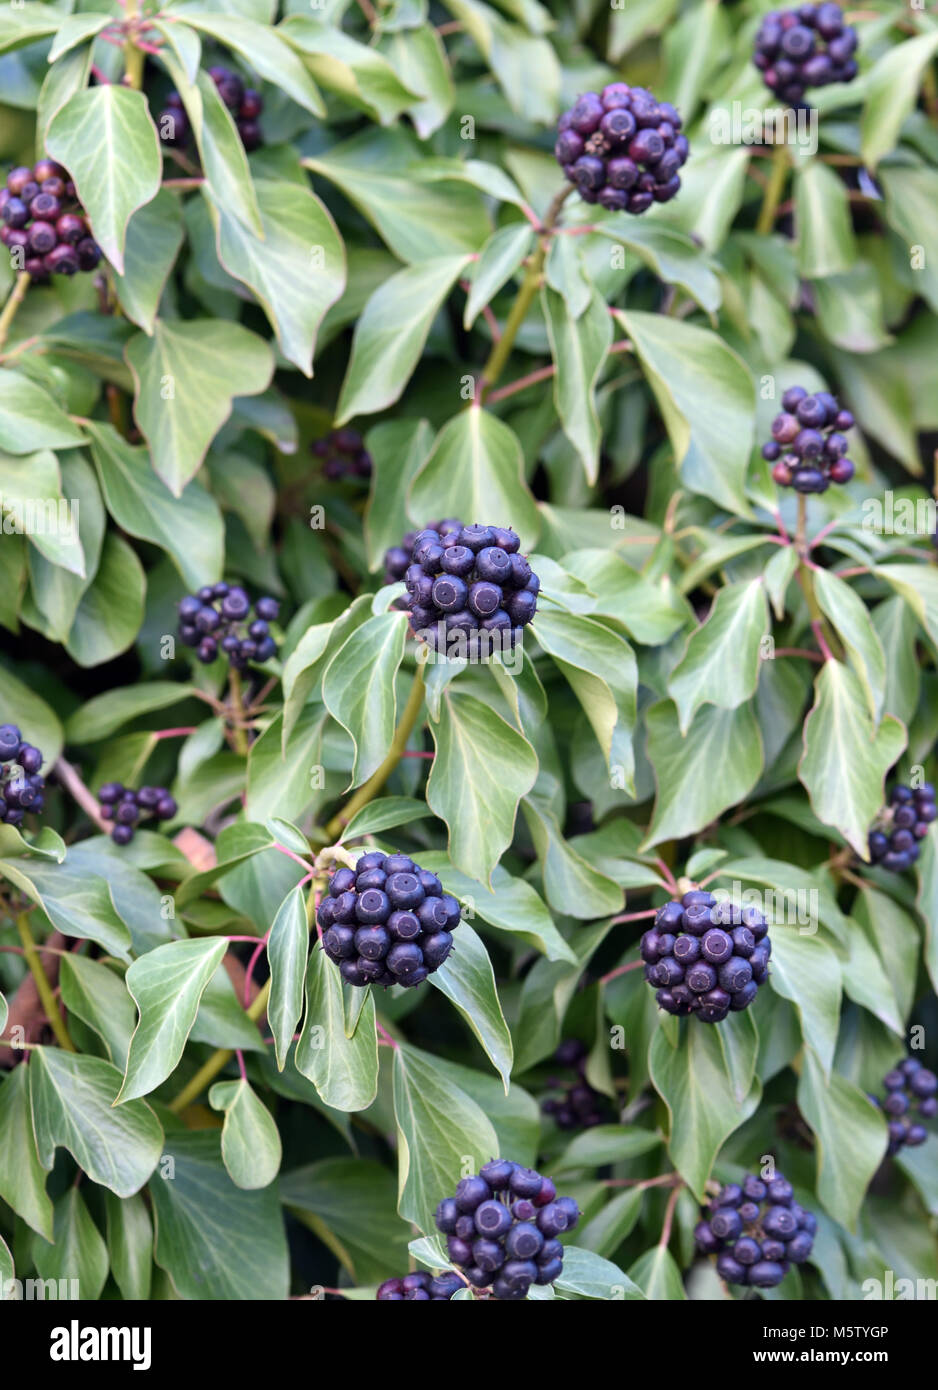 Black, ripe fruit on a mature ivy (Hedera helix helix) plant. The fruit do not ripen until the New Year and are an important source of food Stock Photo